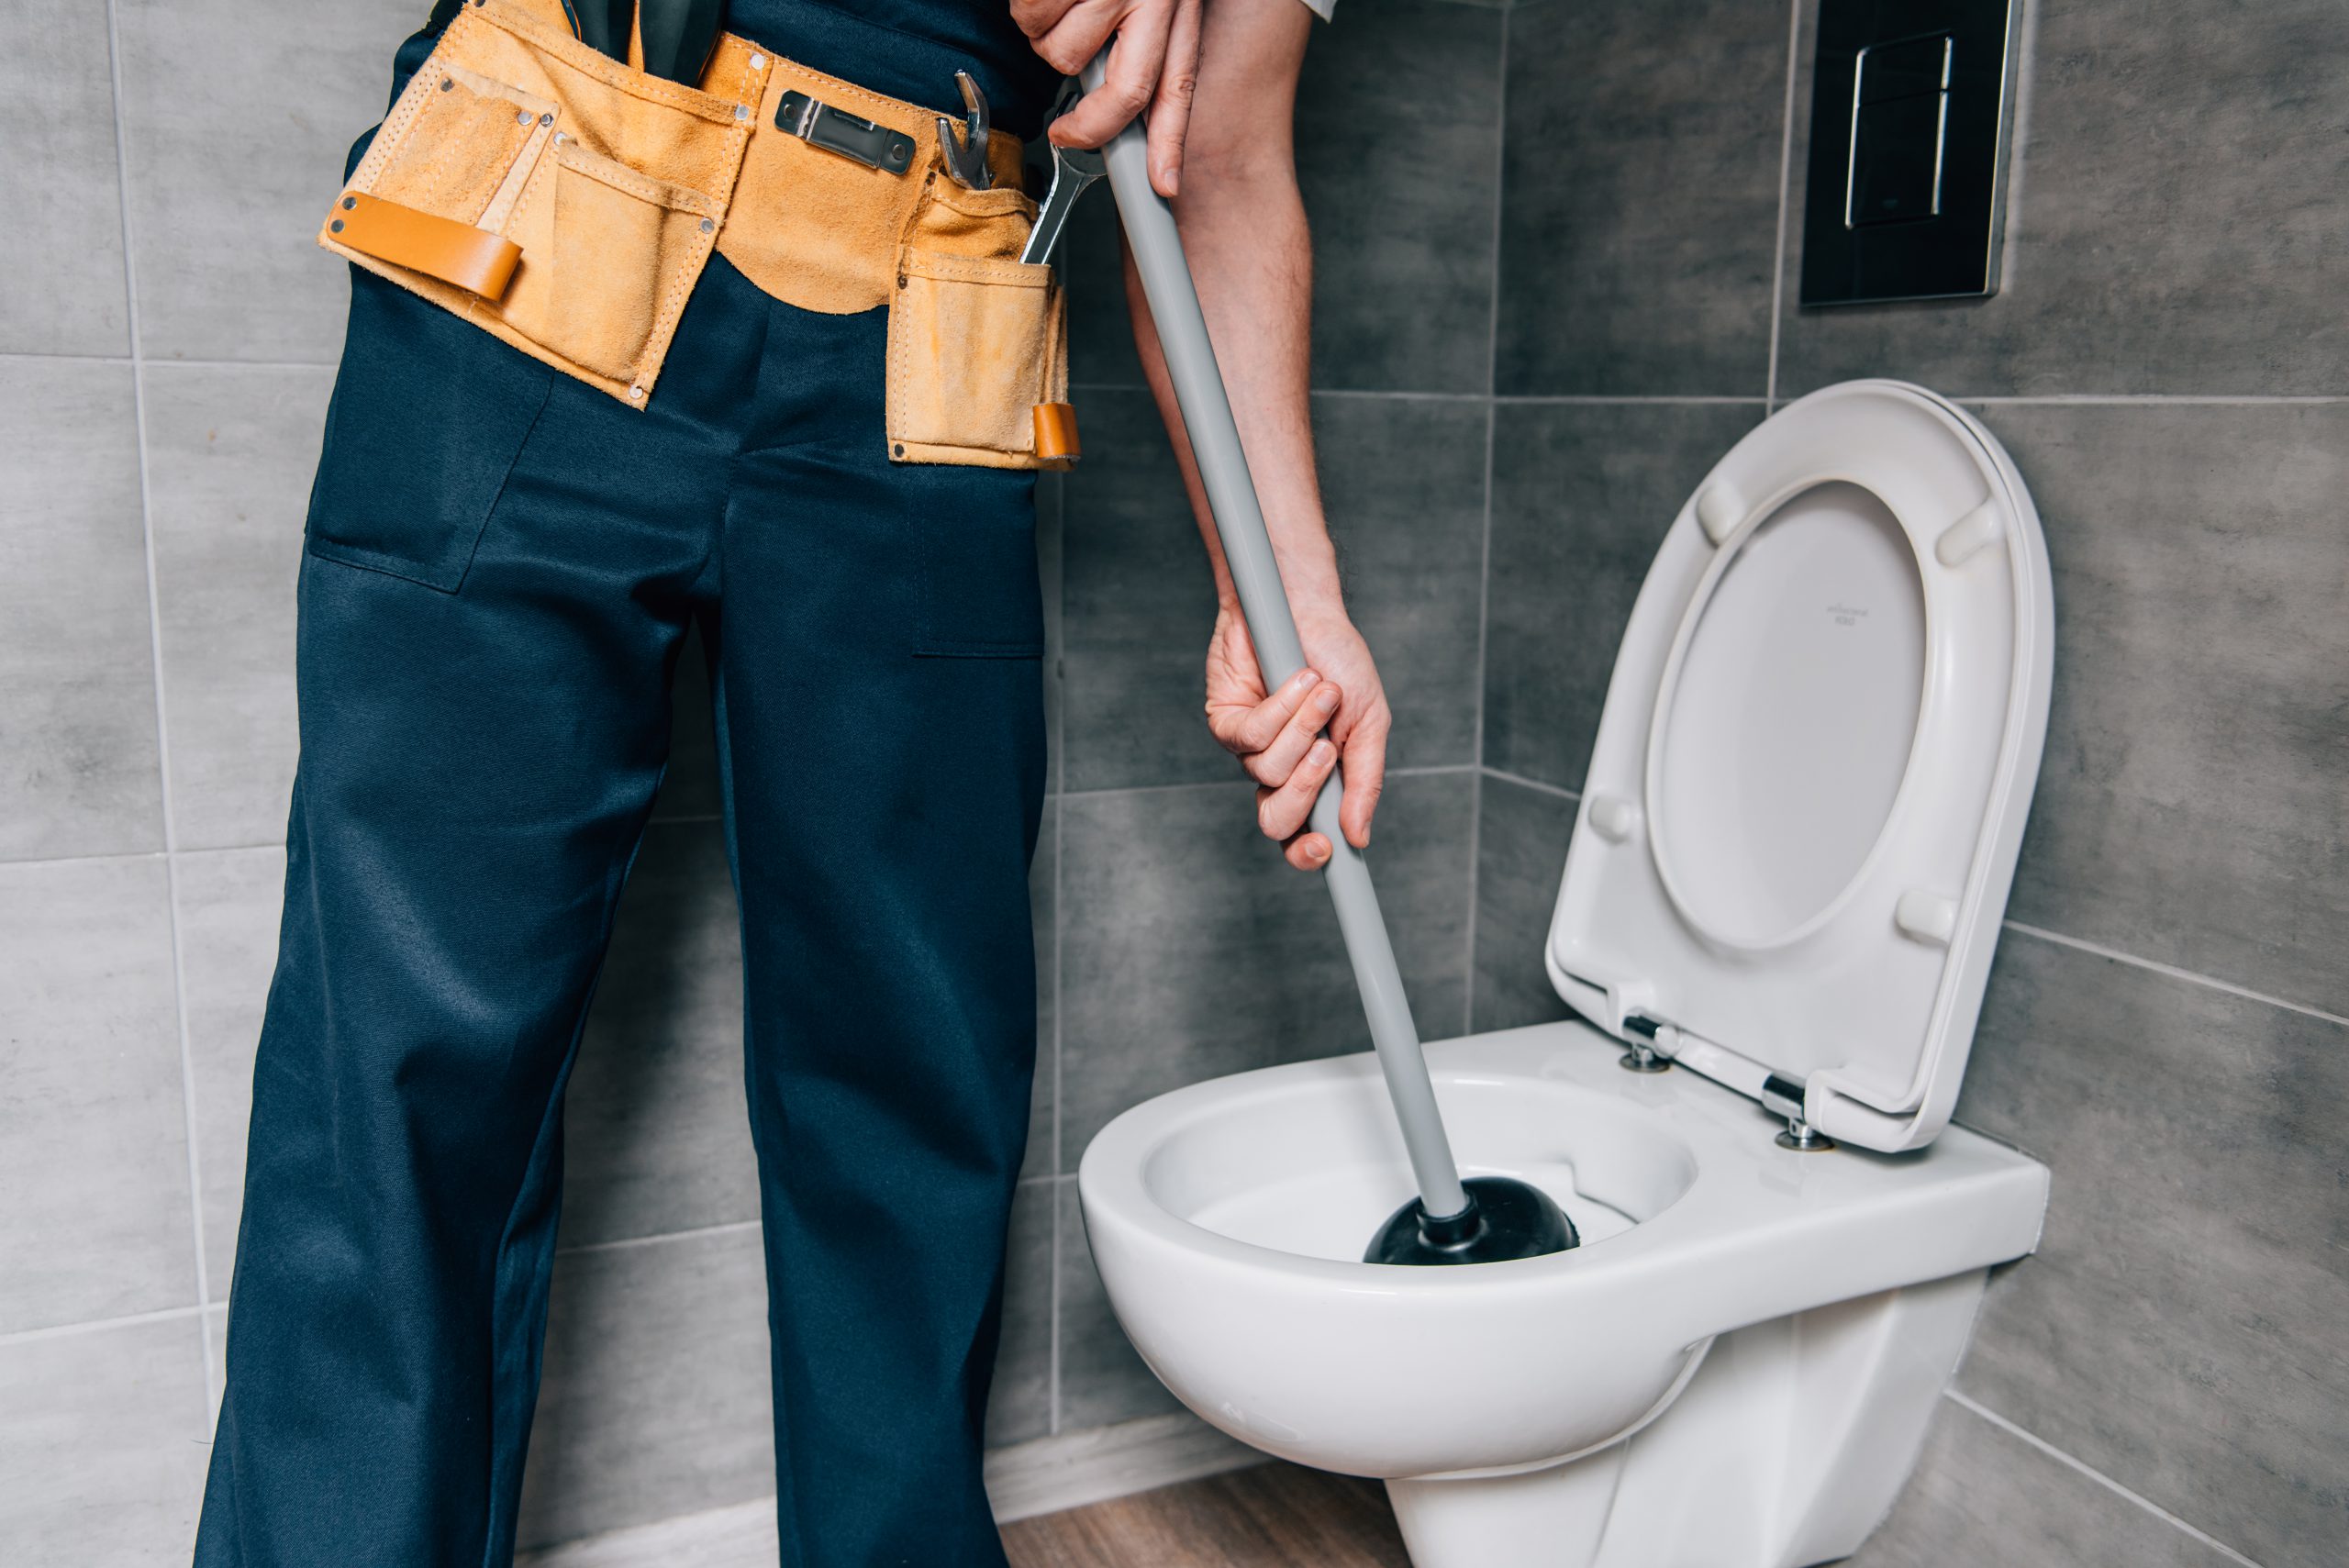 Partial View Of Male Plumber Using Plunger And Cleaning Toilet In Bathroom